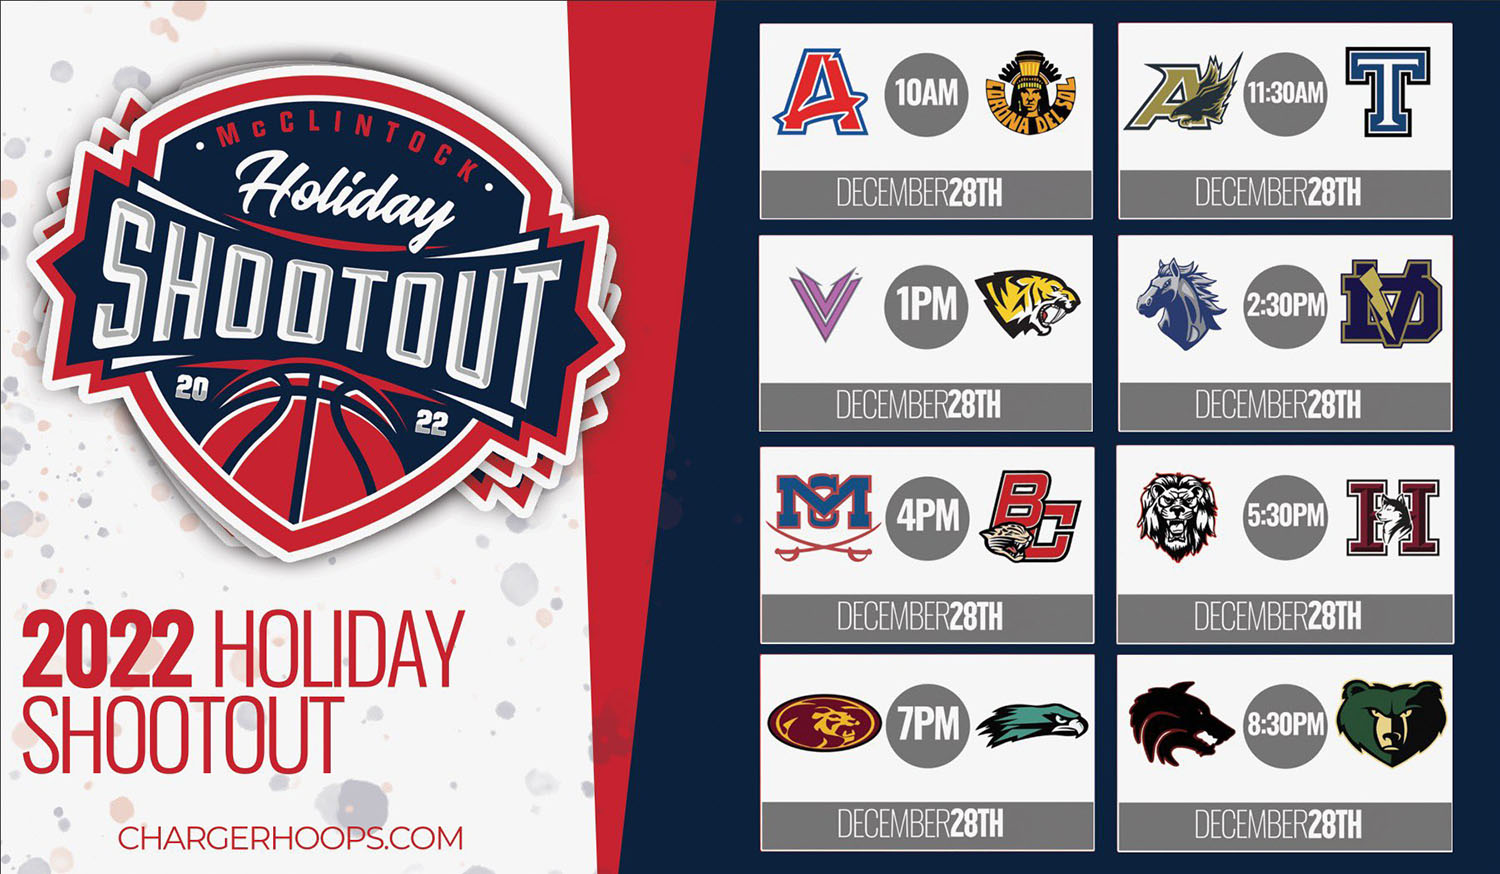 Gameday 3 of the McClintock Holiday Shootout 2022!